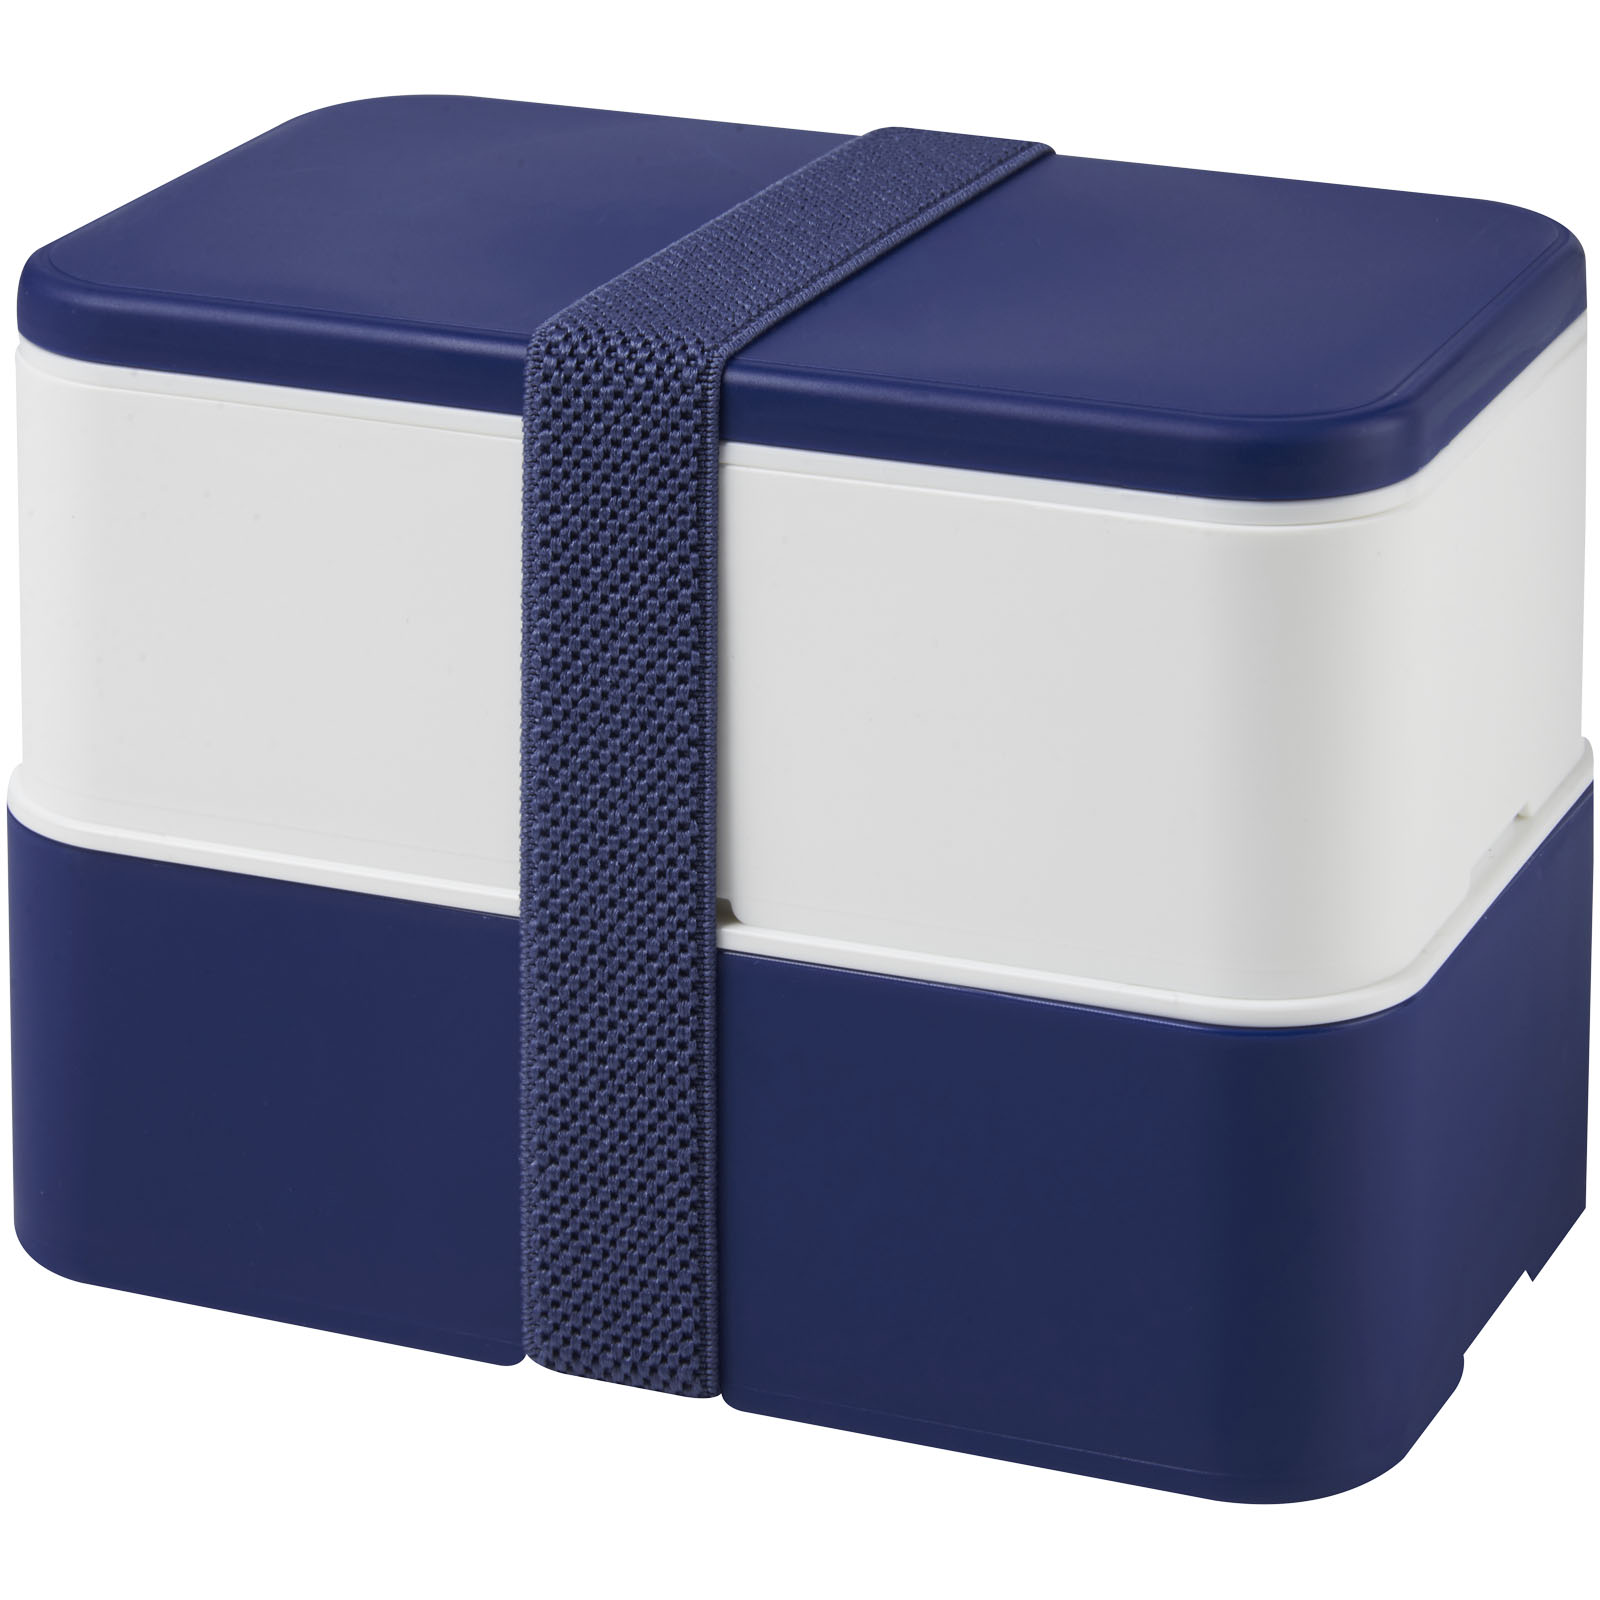 Lunch Boxes - MIYO double layer lunch box